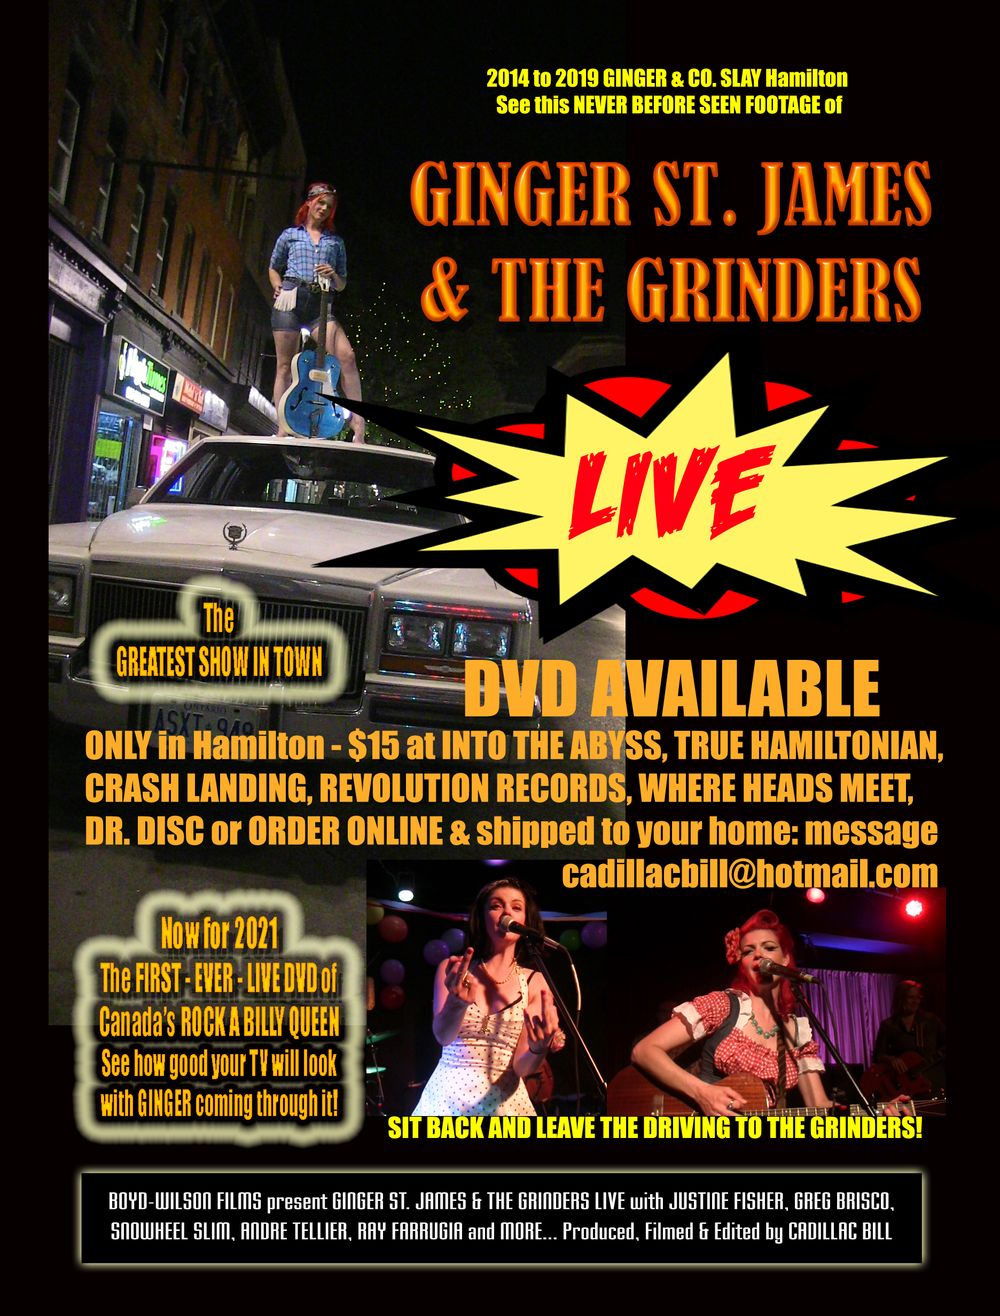 ***EXTRA! EXTRA! -  - First EVER Ginger St. James live DVD***